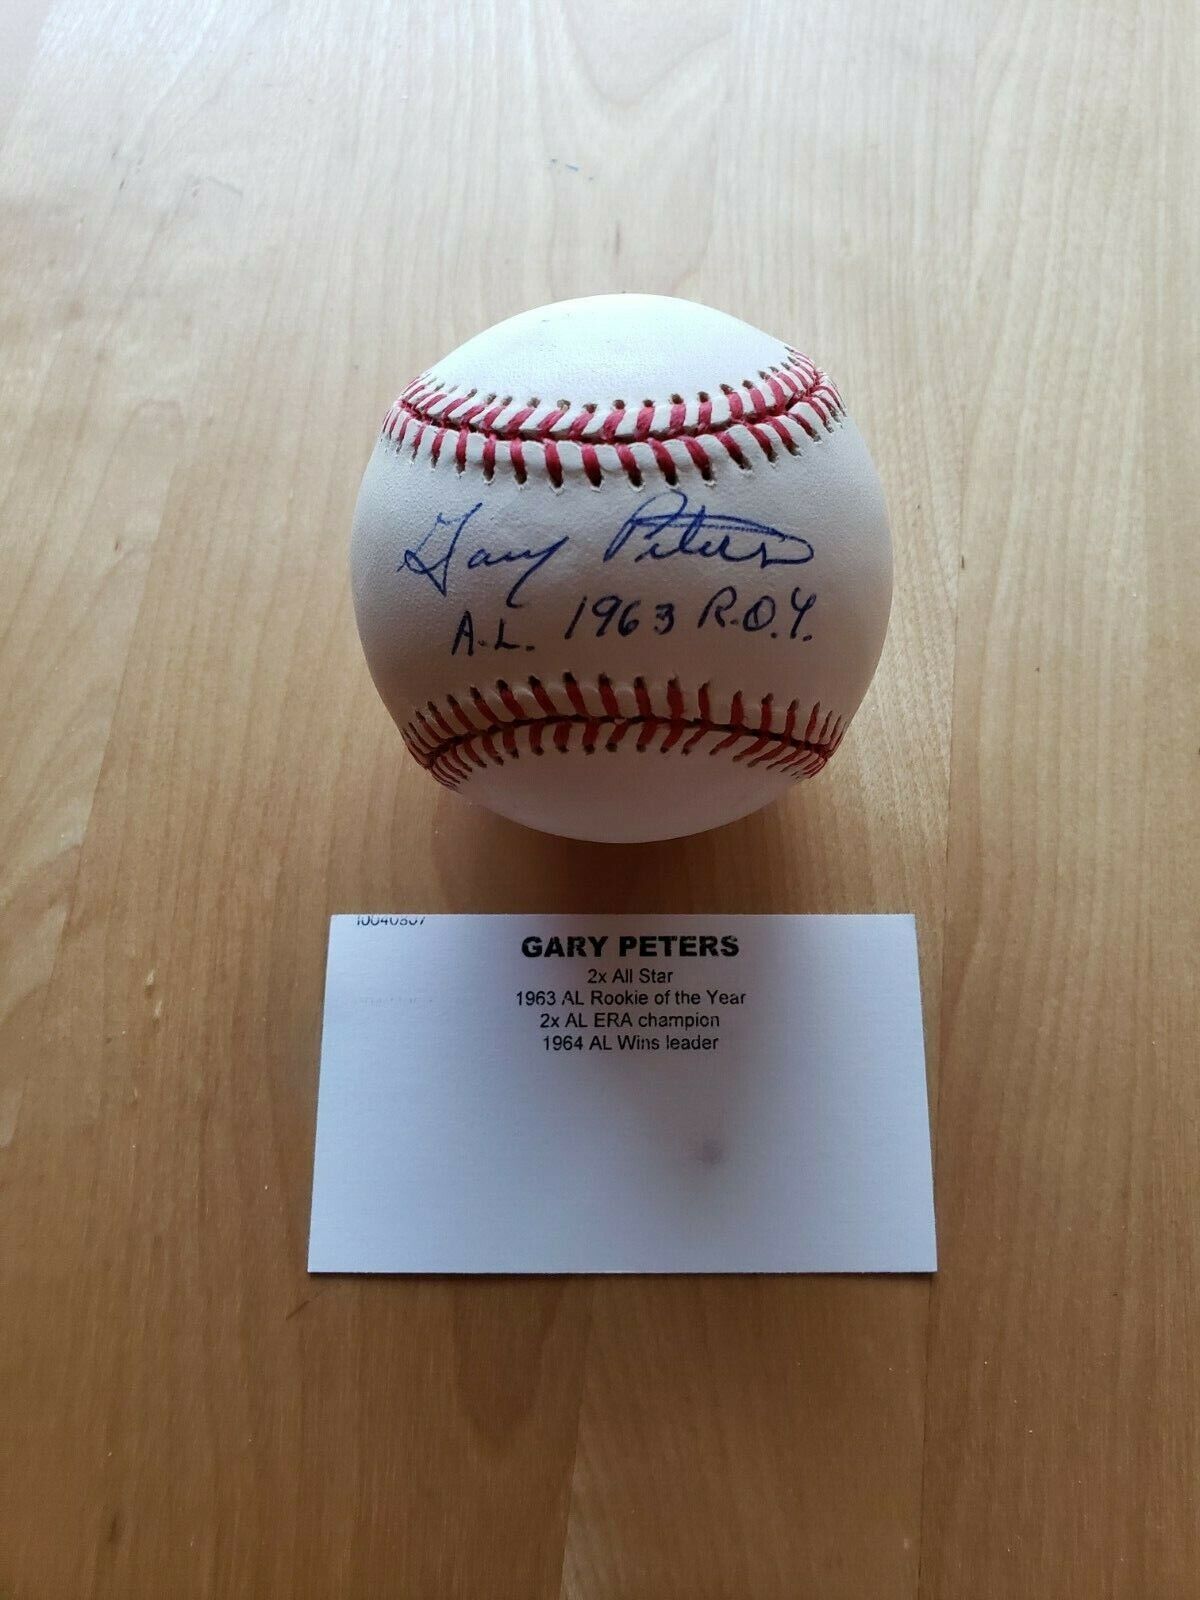 2021 Tristar Baseball Gary Peters autograph 1963 AL ROY Chicago White Sox